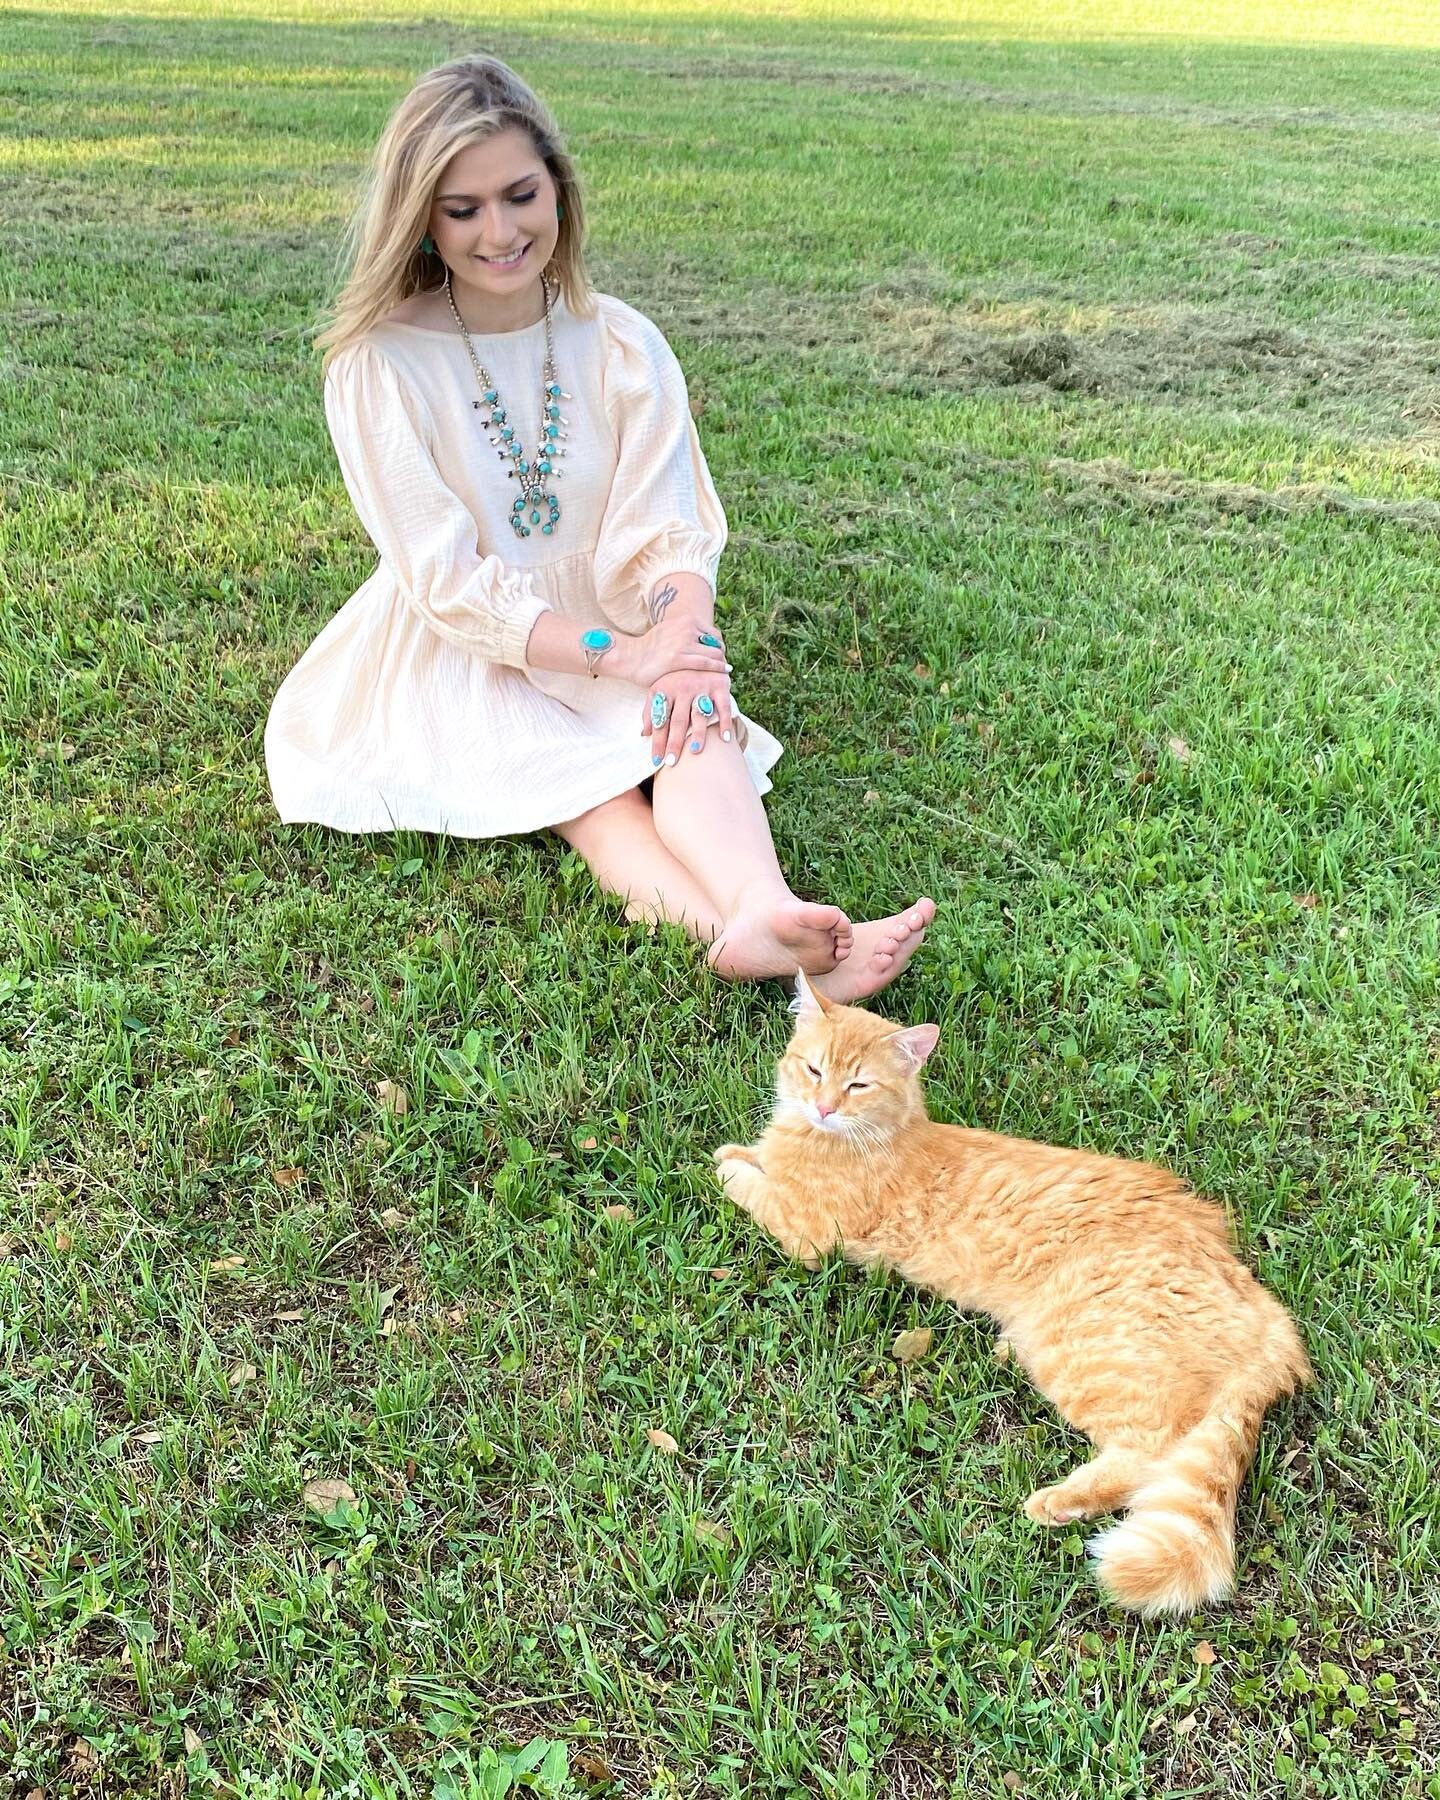 Lazy summer days are on the way! Here&rsquo;s Taylor with Peaches lounging around and looking super cute. Our vintage Squash Blossom looks perfect with her summer dress 💠